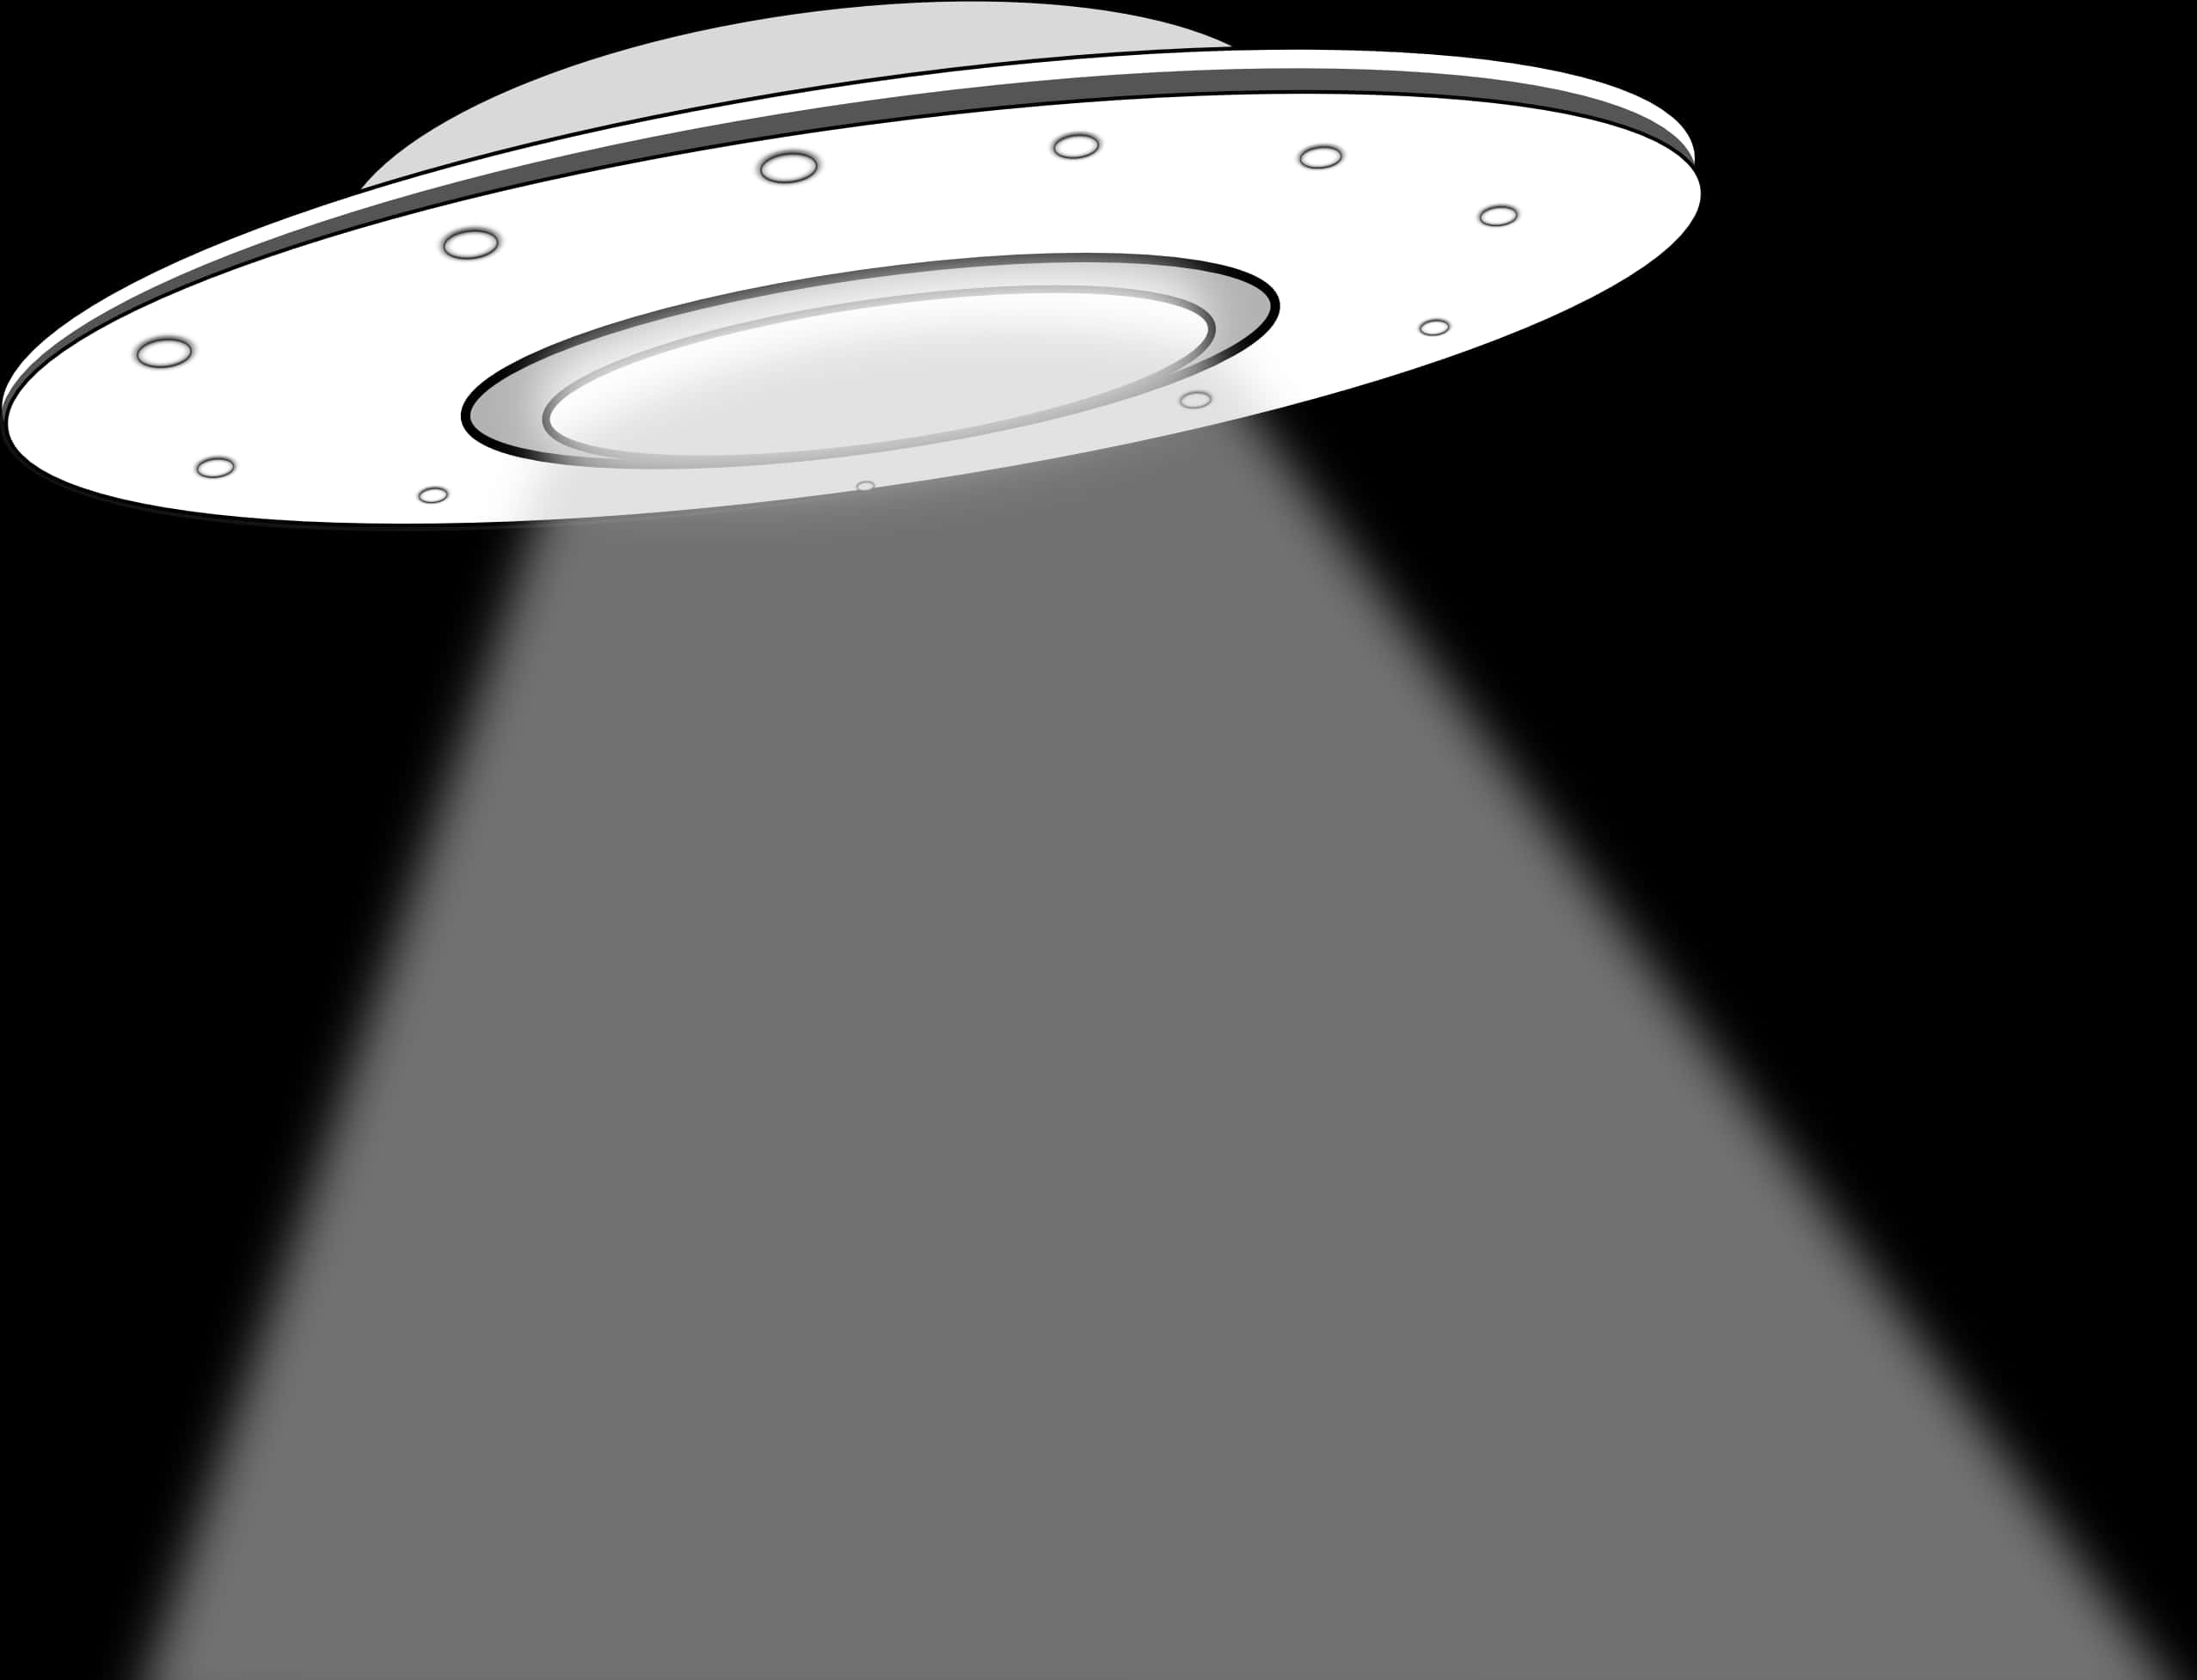 A Ufo Flying Through The Air